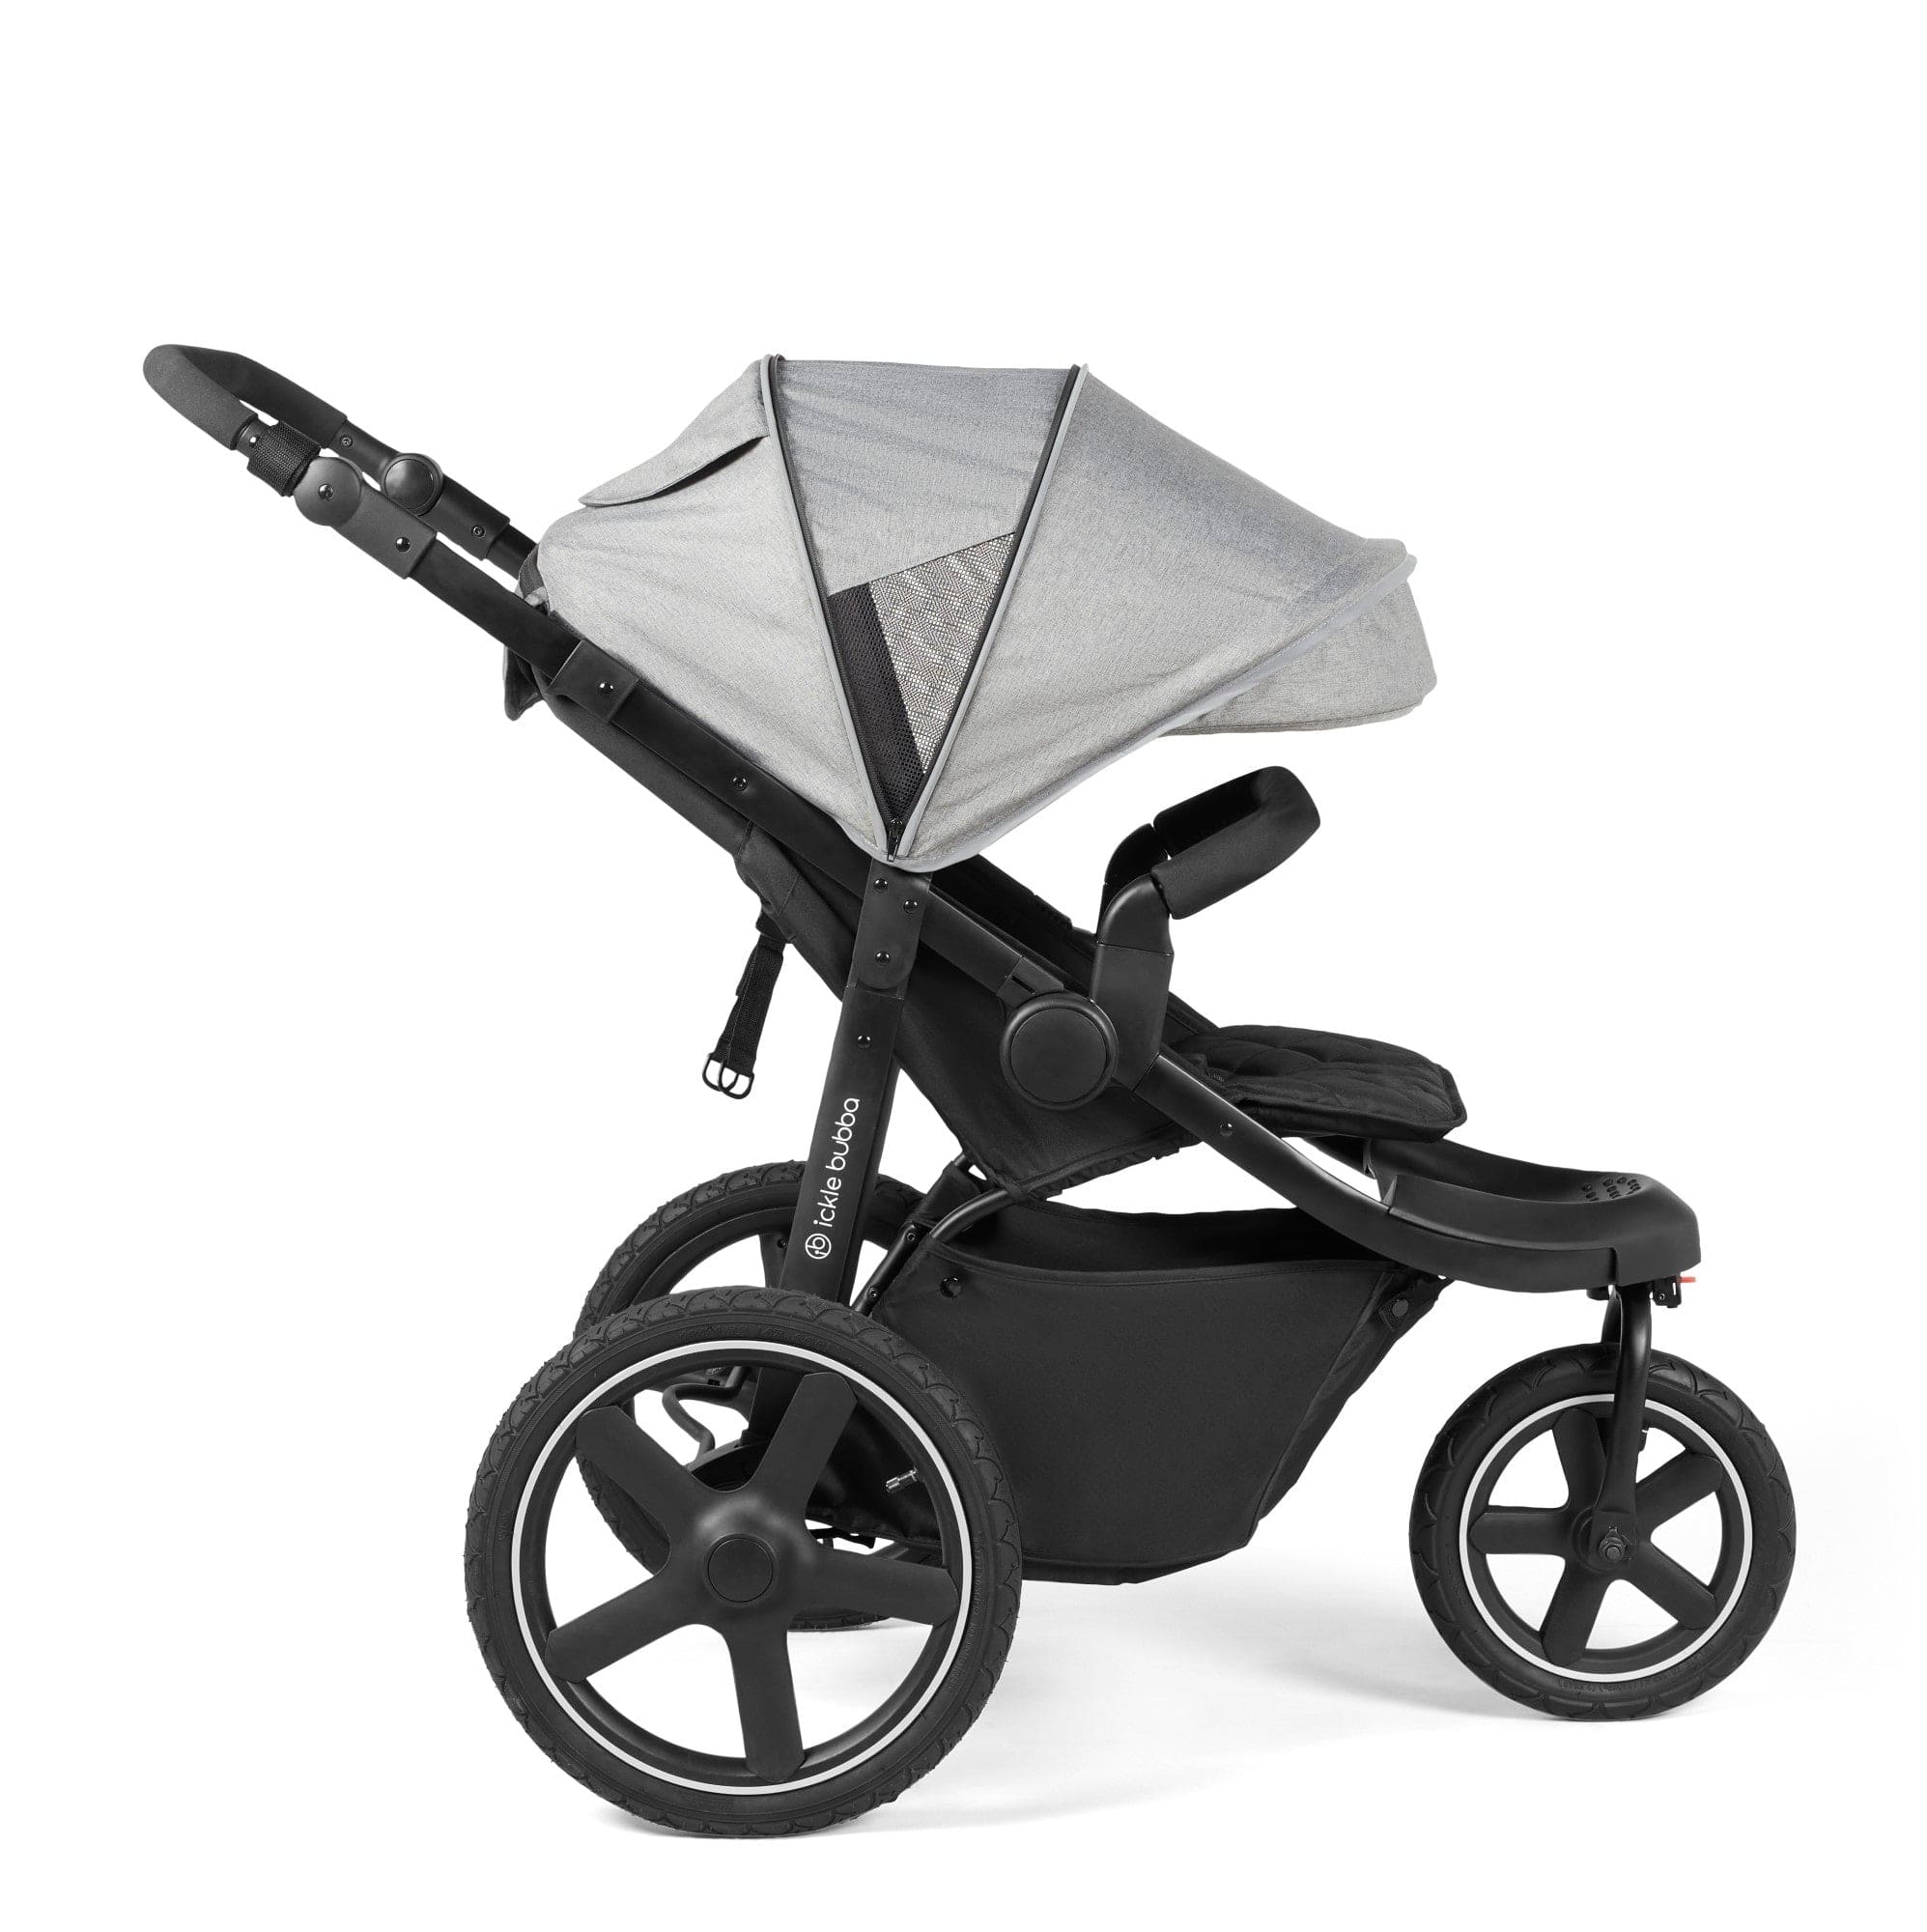 Ickle Bubba 3 wheel pushchairs Ickle Bubba Venus Max Jogger Stroller - Black/Space Grey 18-004-200-014